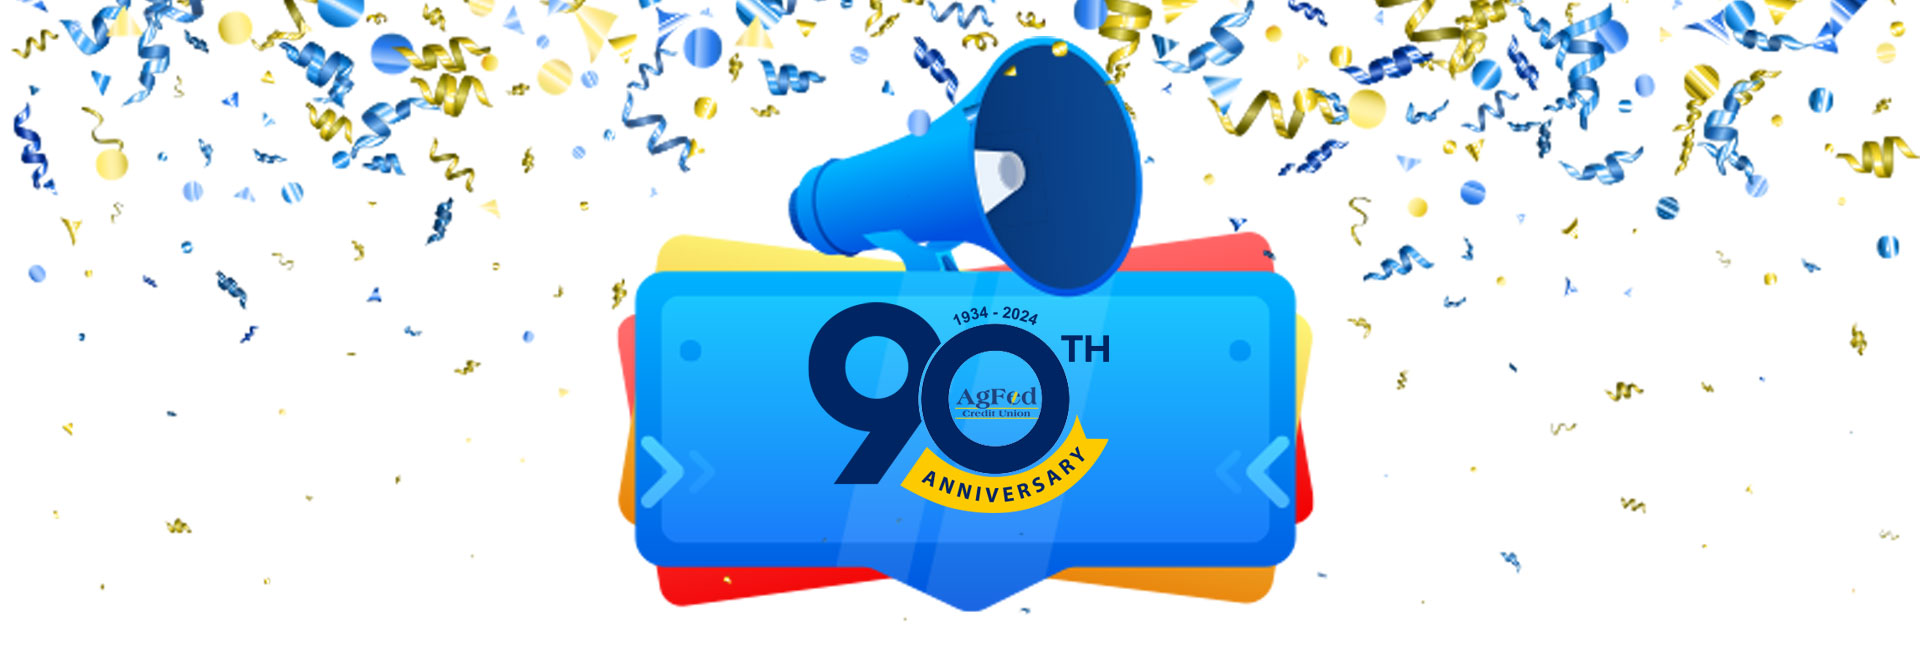 90th_Member-Voices_homepage-banner-1920x650